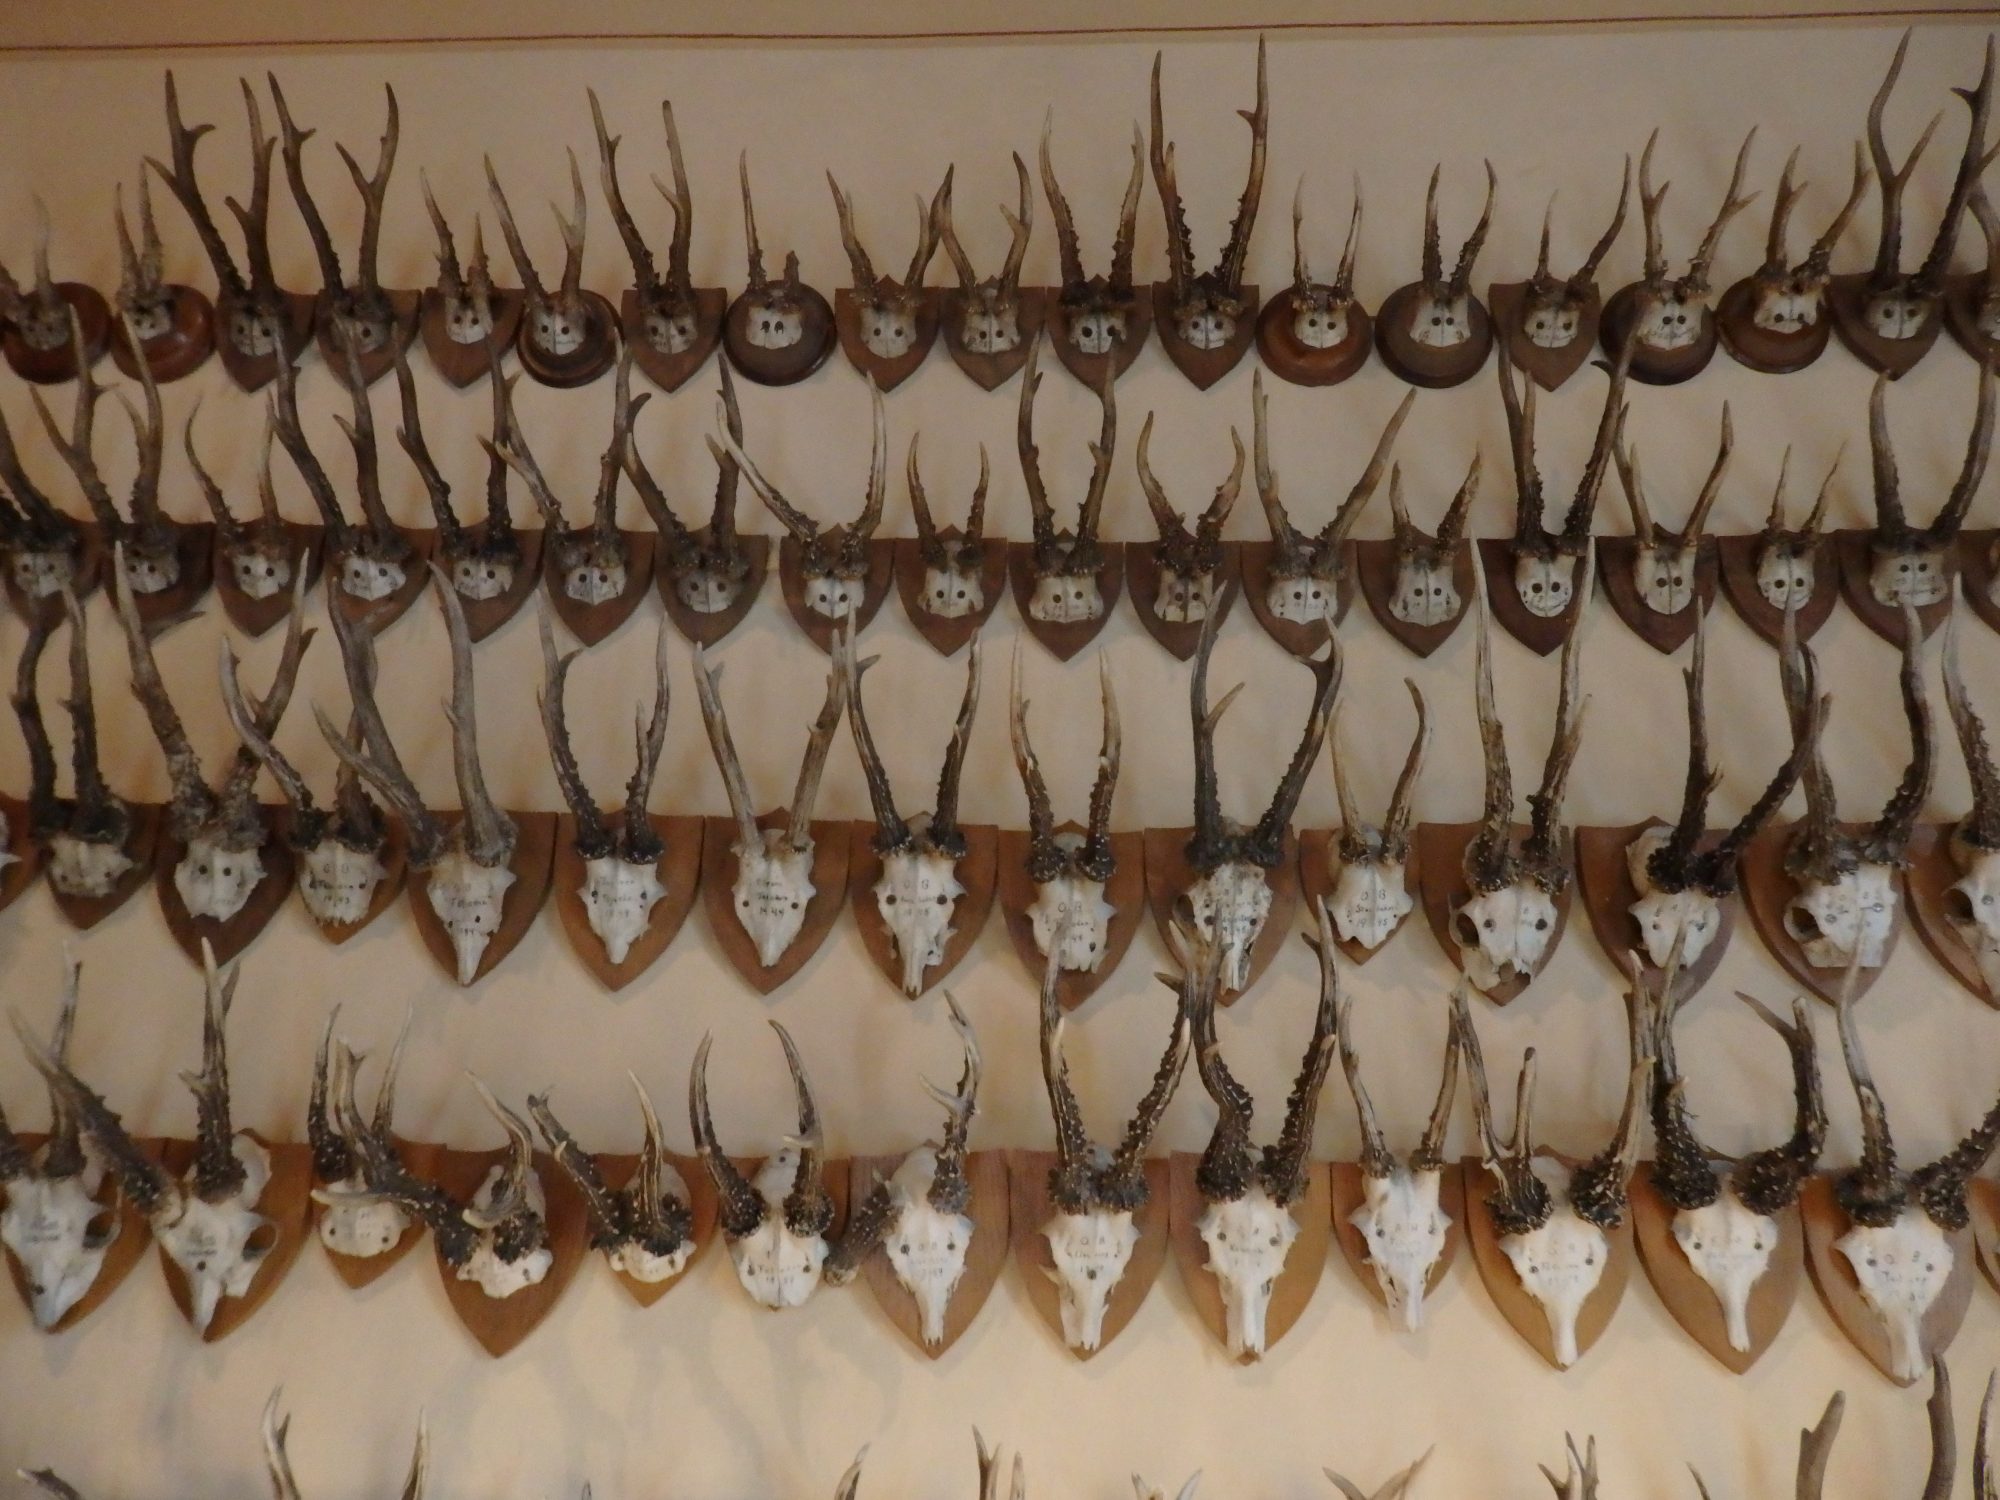 a display of skulls and antlers in Öster Malma